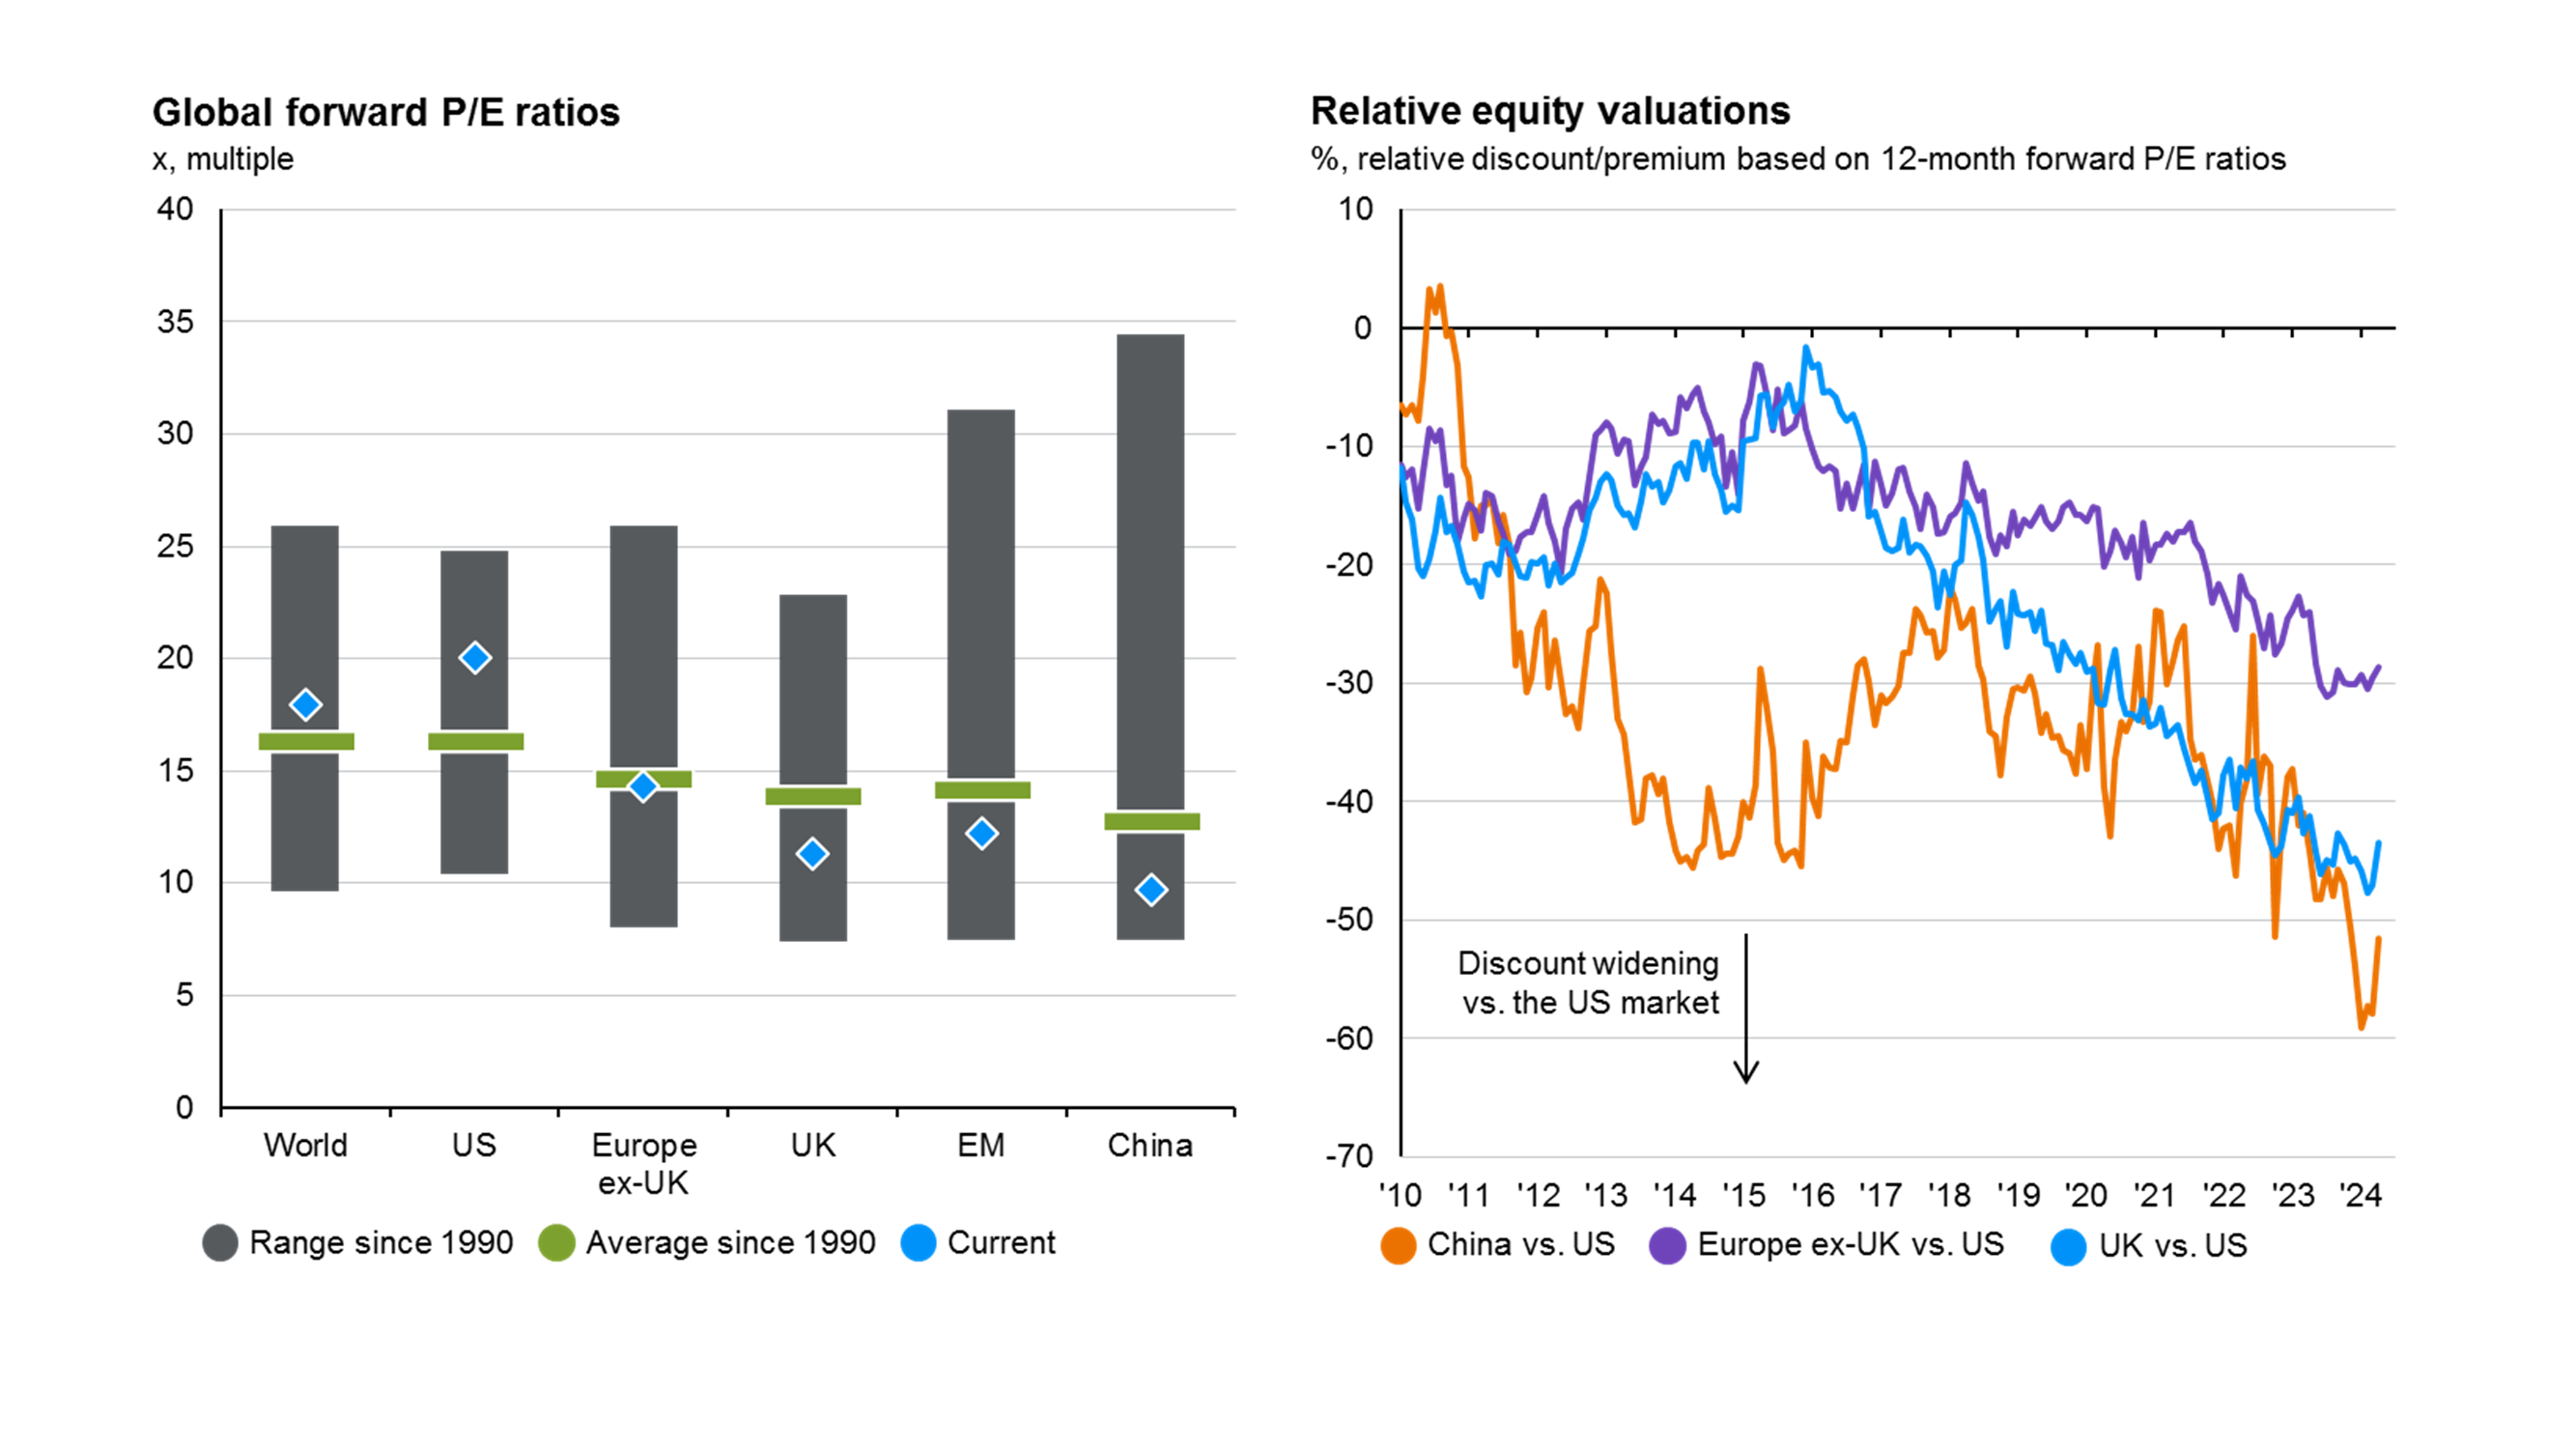 World equity valuations